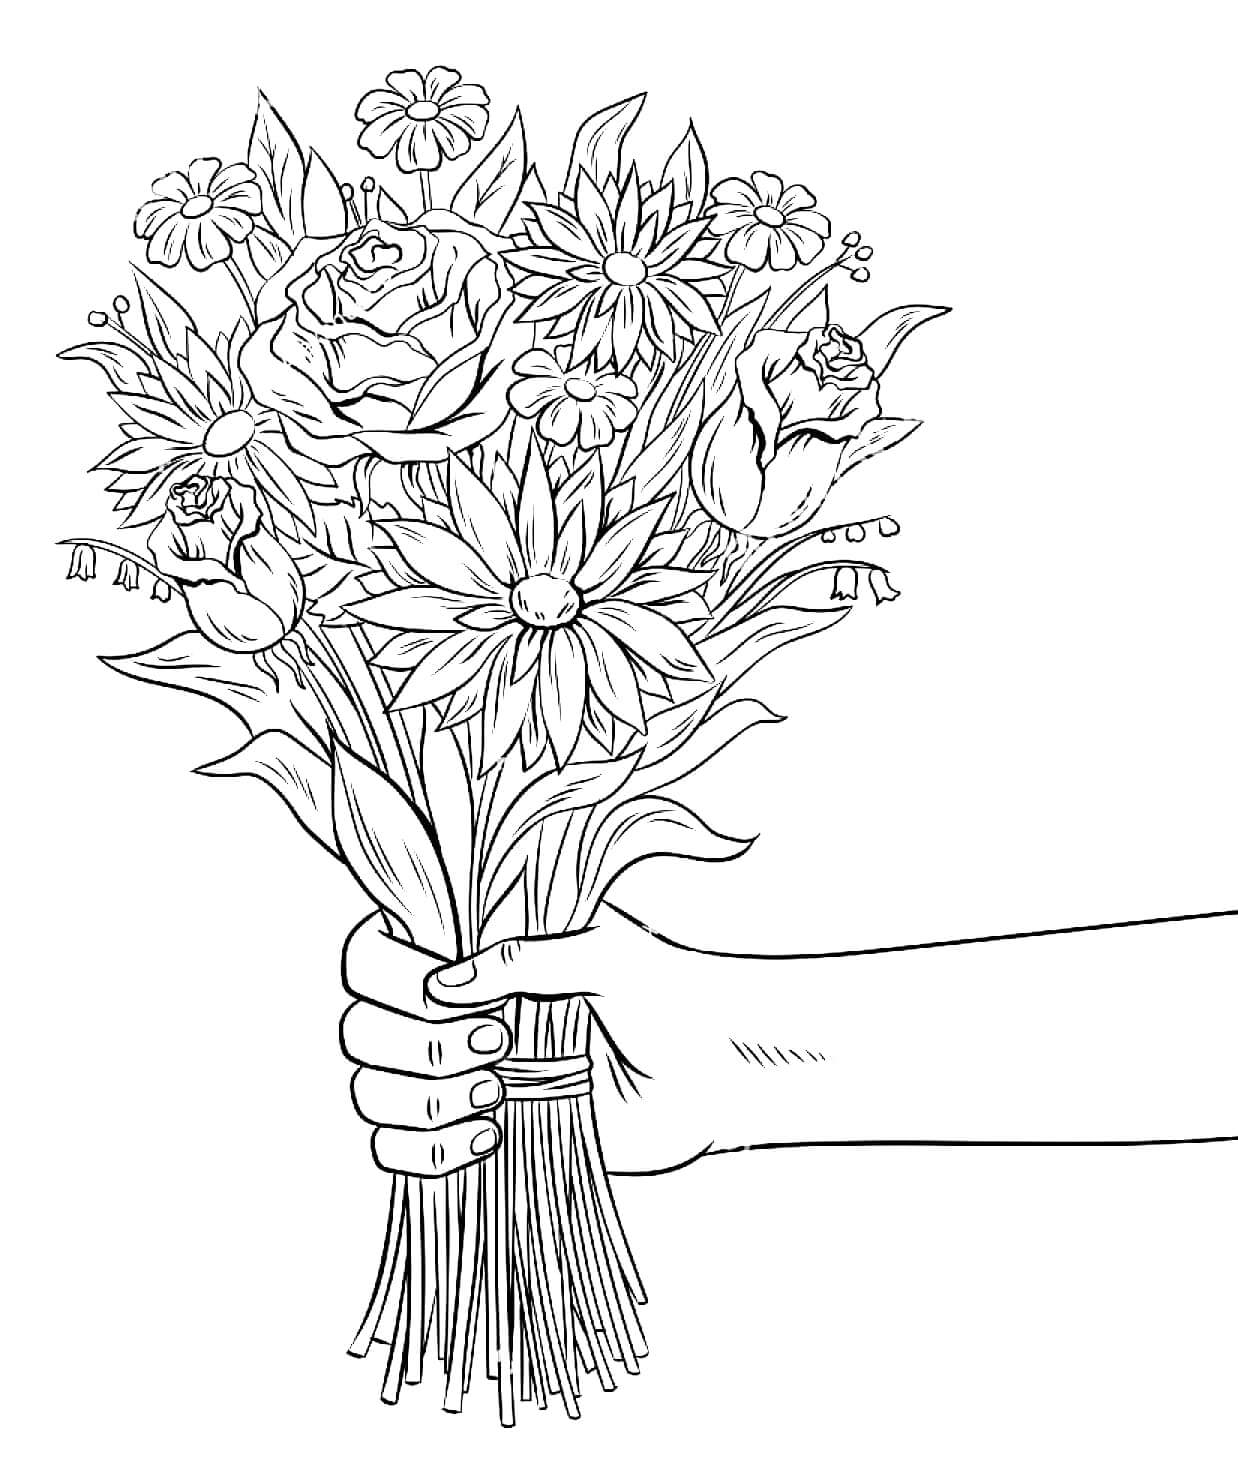 sunflower coloring pages for adults | flower coloring pages for adults pdf | spring flower coloring pages for adults